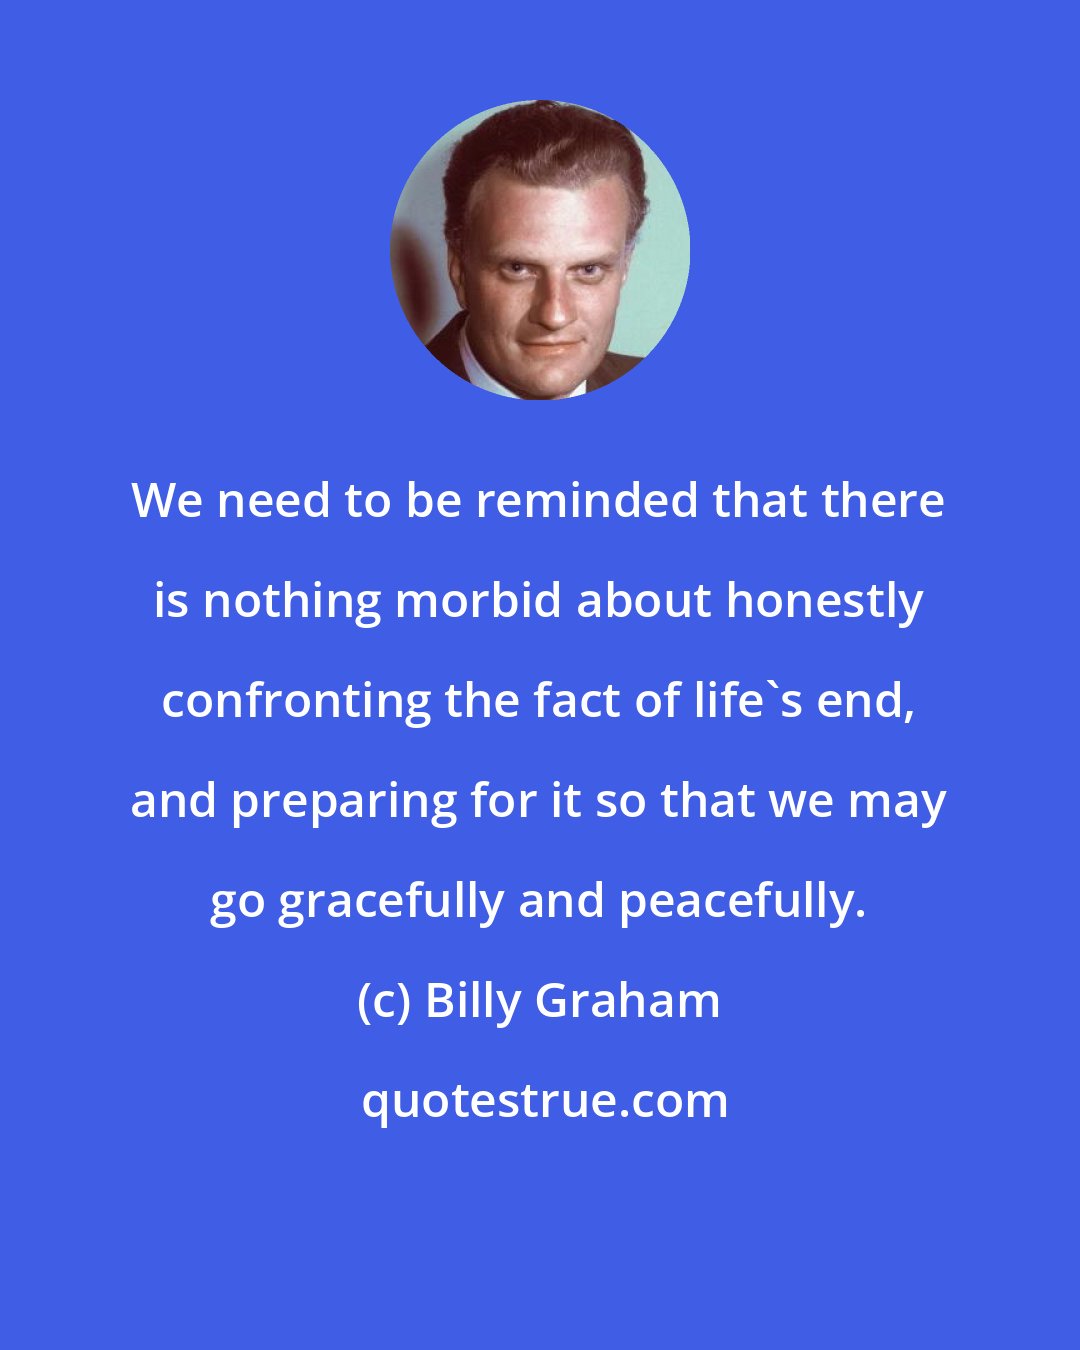 Billy Graham: We need to be reminded that there is nothing morbid about honestly confronting the fact of life's end, and preparing for it so that we may go gracefully and peacefully.